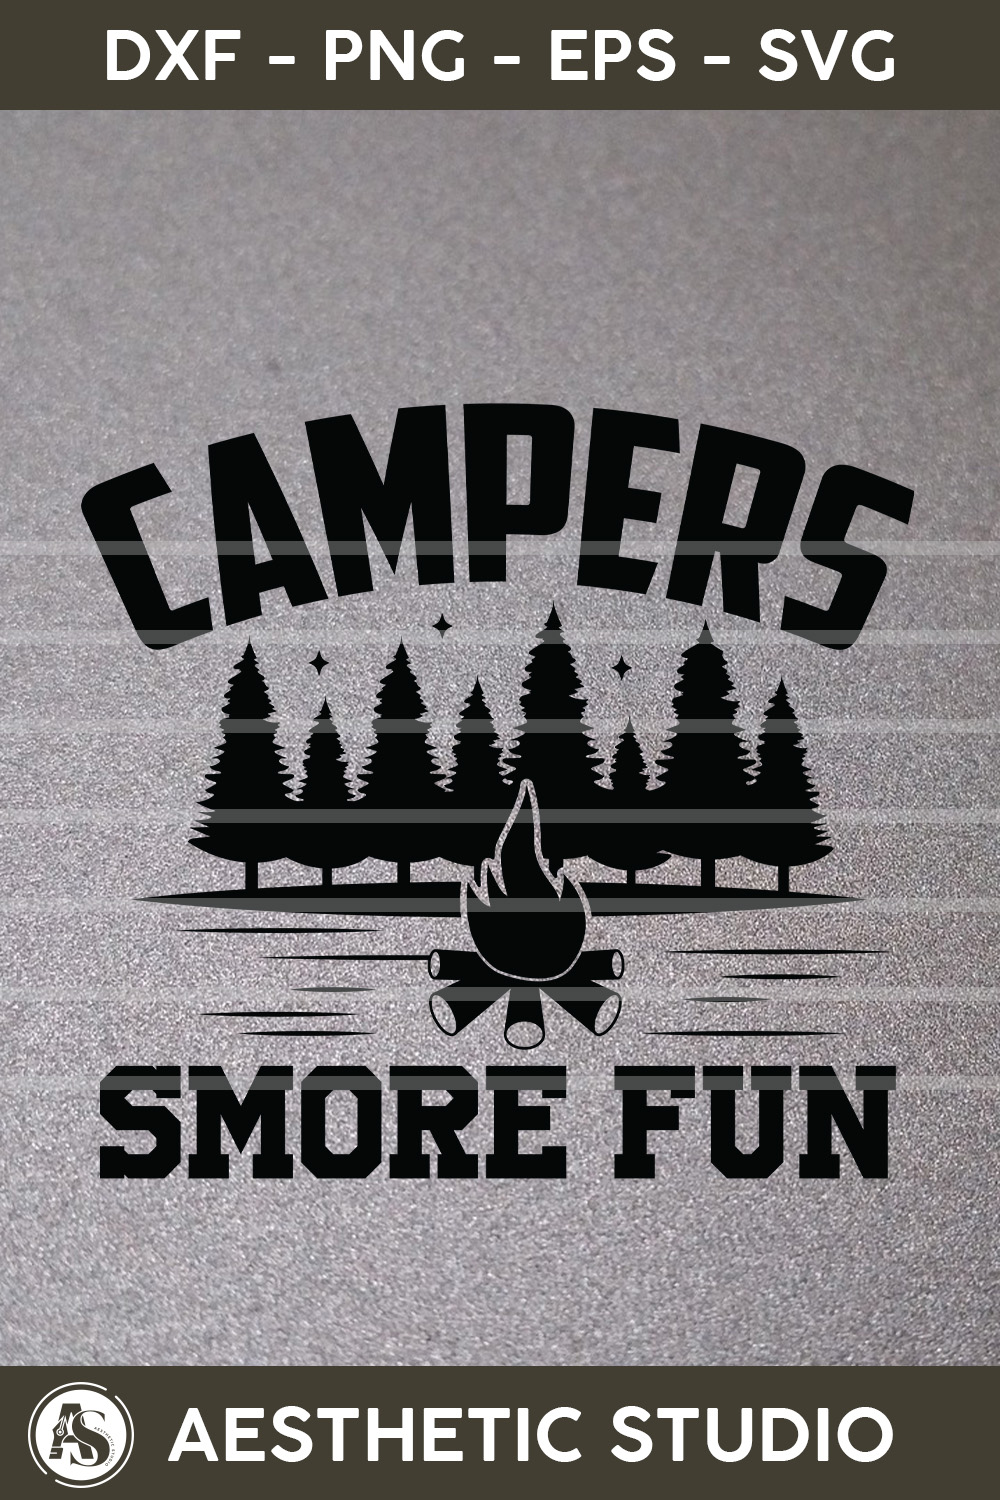 Campers Have Smore Fun, Camper, Adventure, Camp Life, Camping Svg, Typography, Camping Quotes, Camping Cut File, Funny Camping, Camping T-shirt Design, Svg, Eps, Dxf, Png, Cut file pinterest preview image.